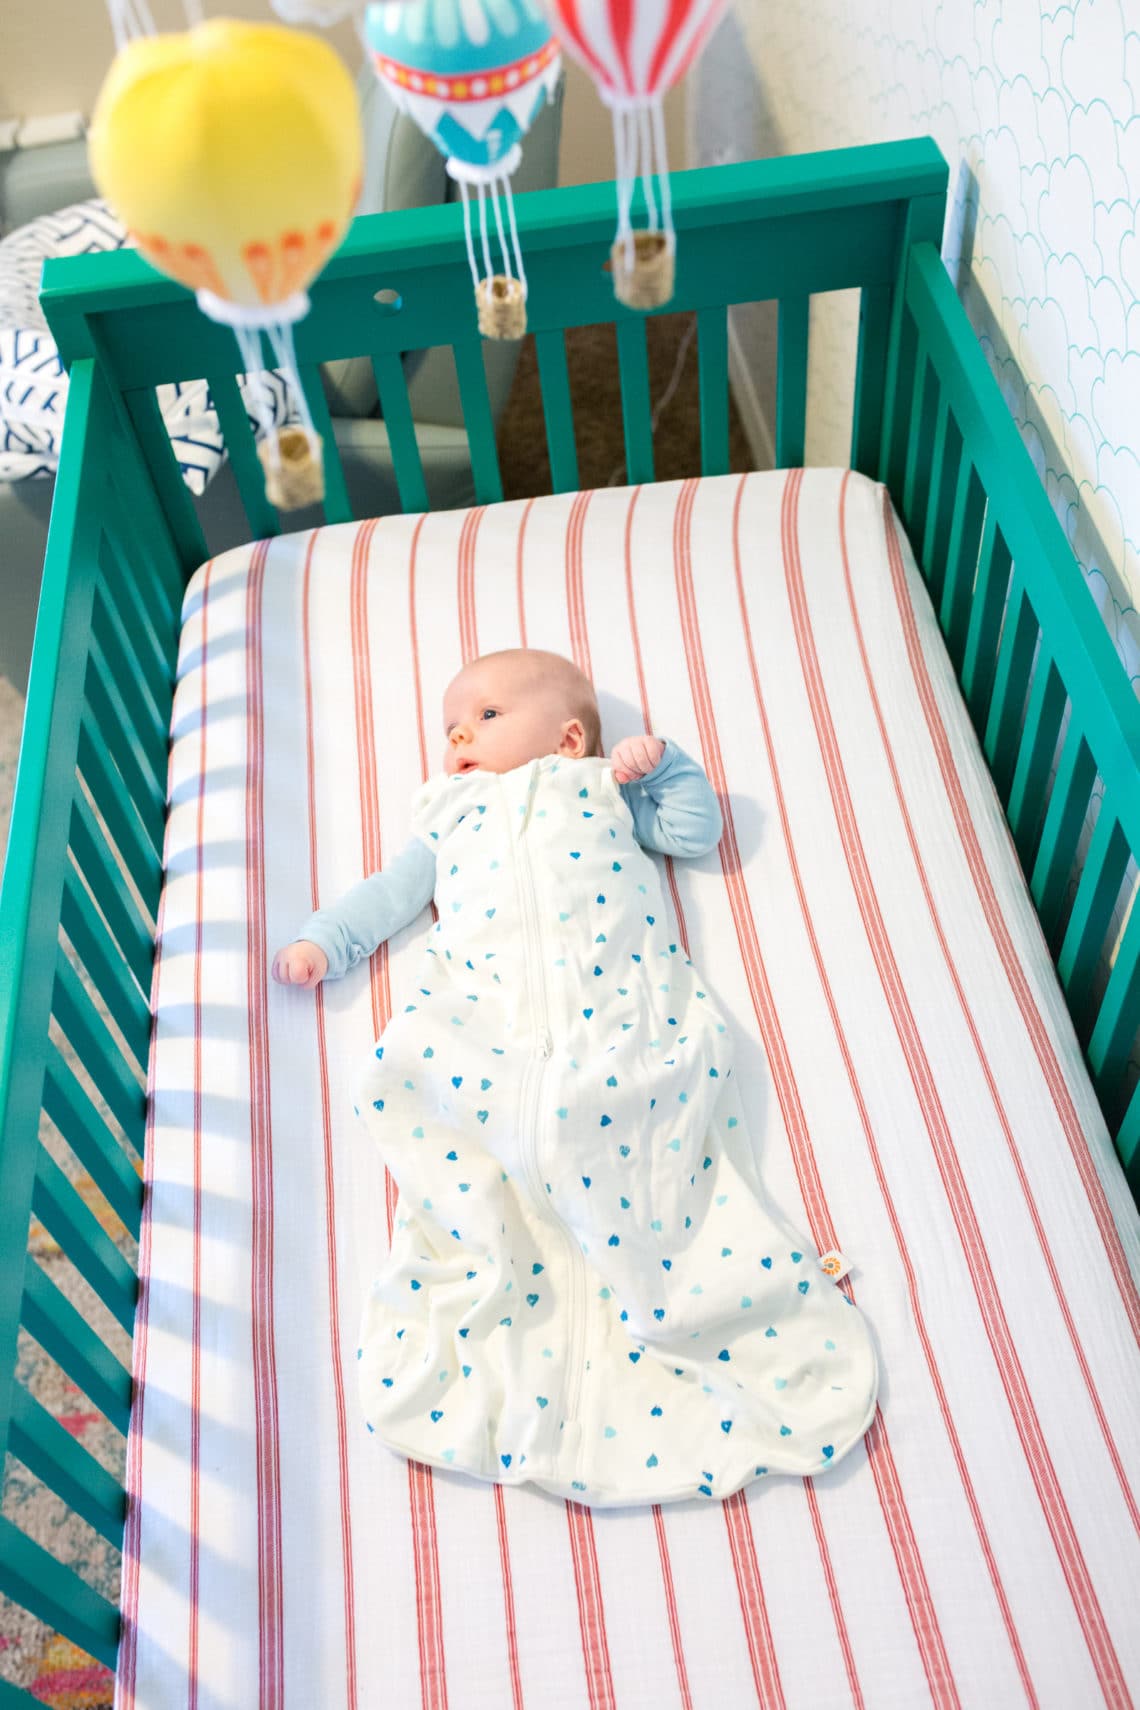 How to Get Baby to Sleep in a Crib